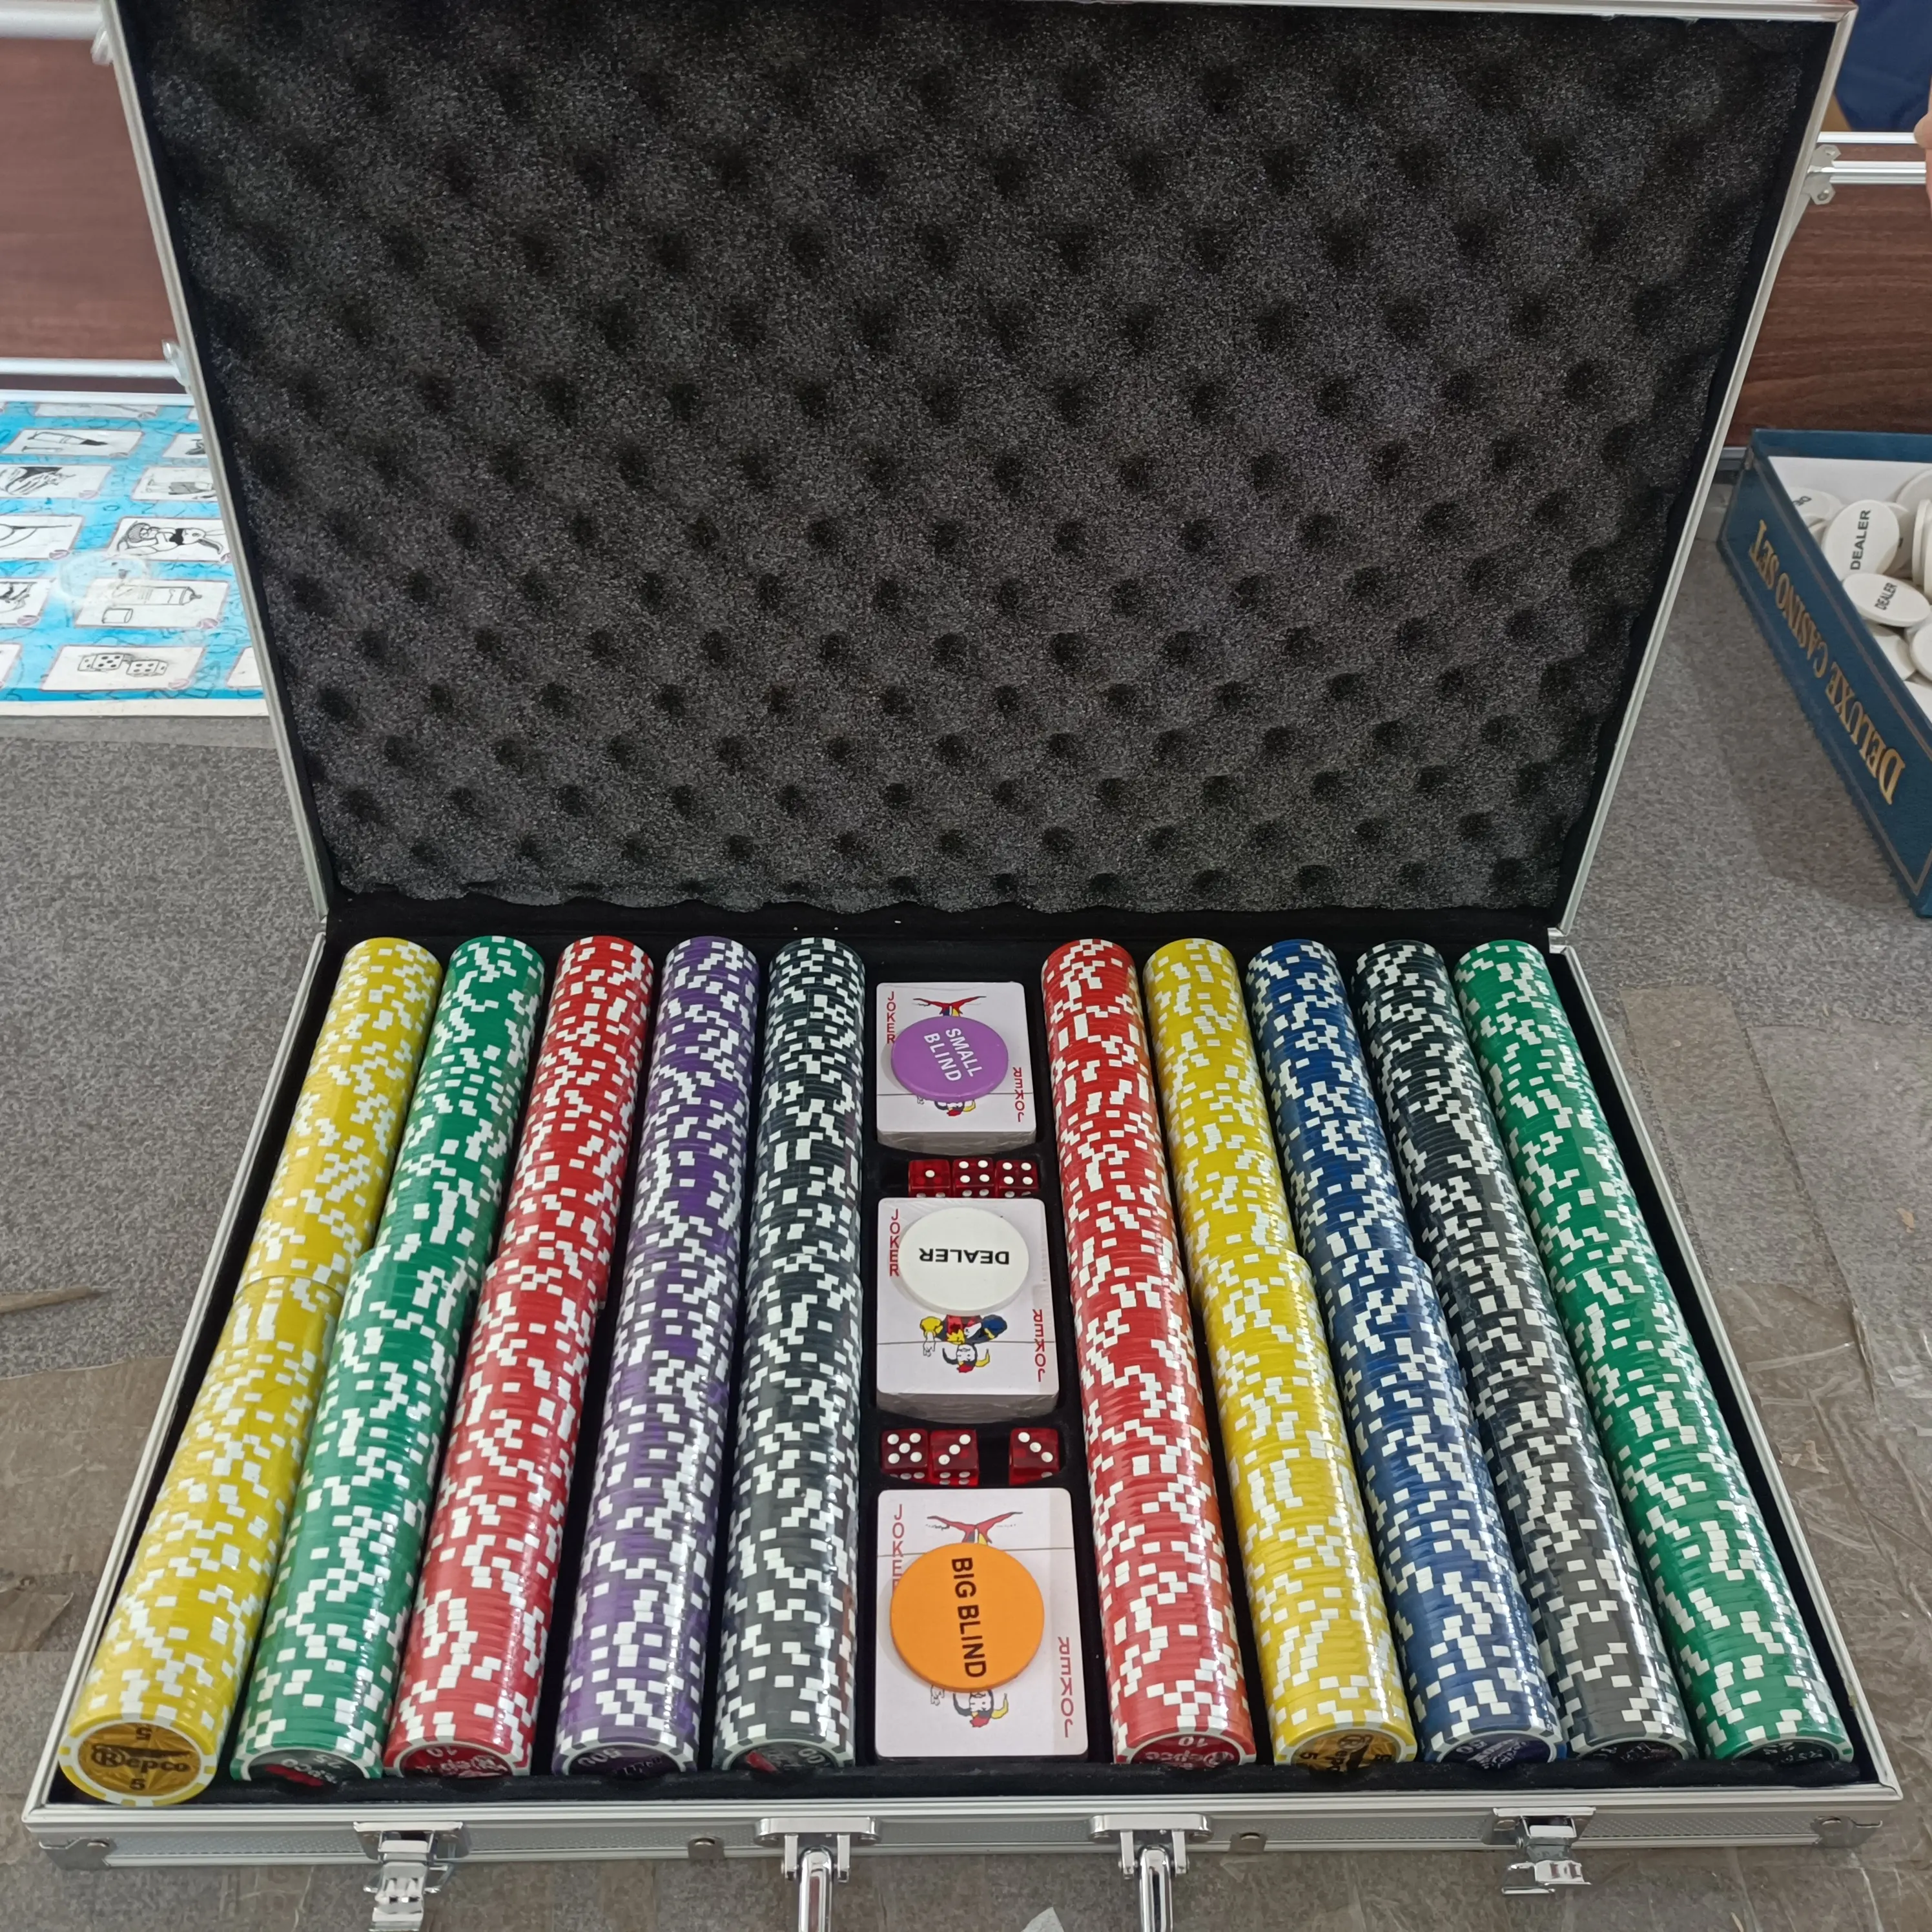 Customized 1000 pieces casino ABS poker chips 2 playing cards 5 dice aluminium case poker chips sets